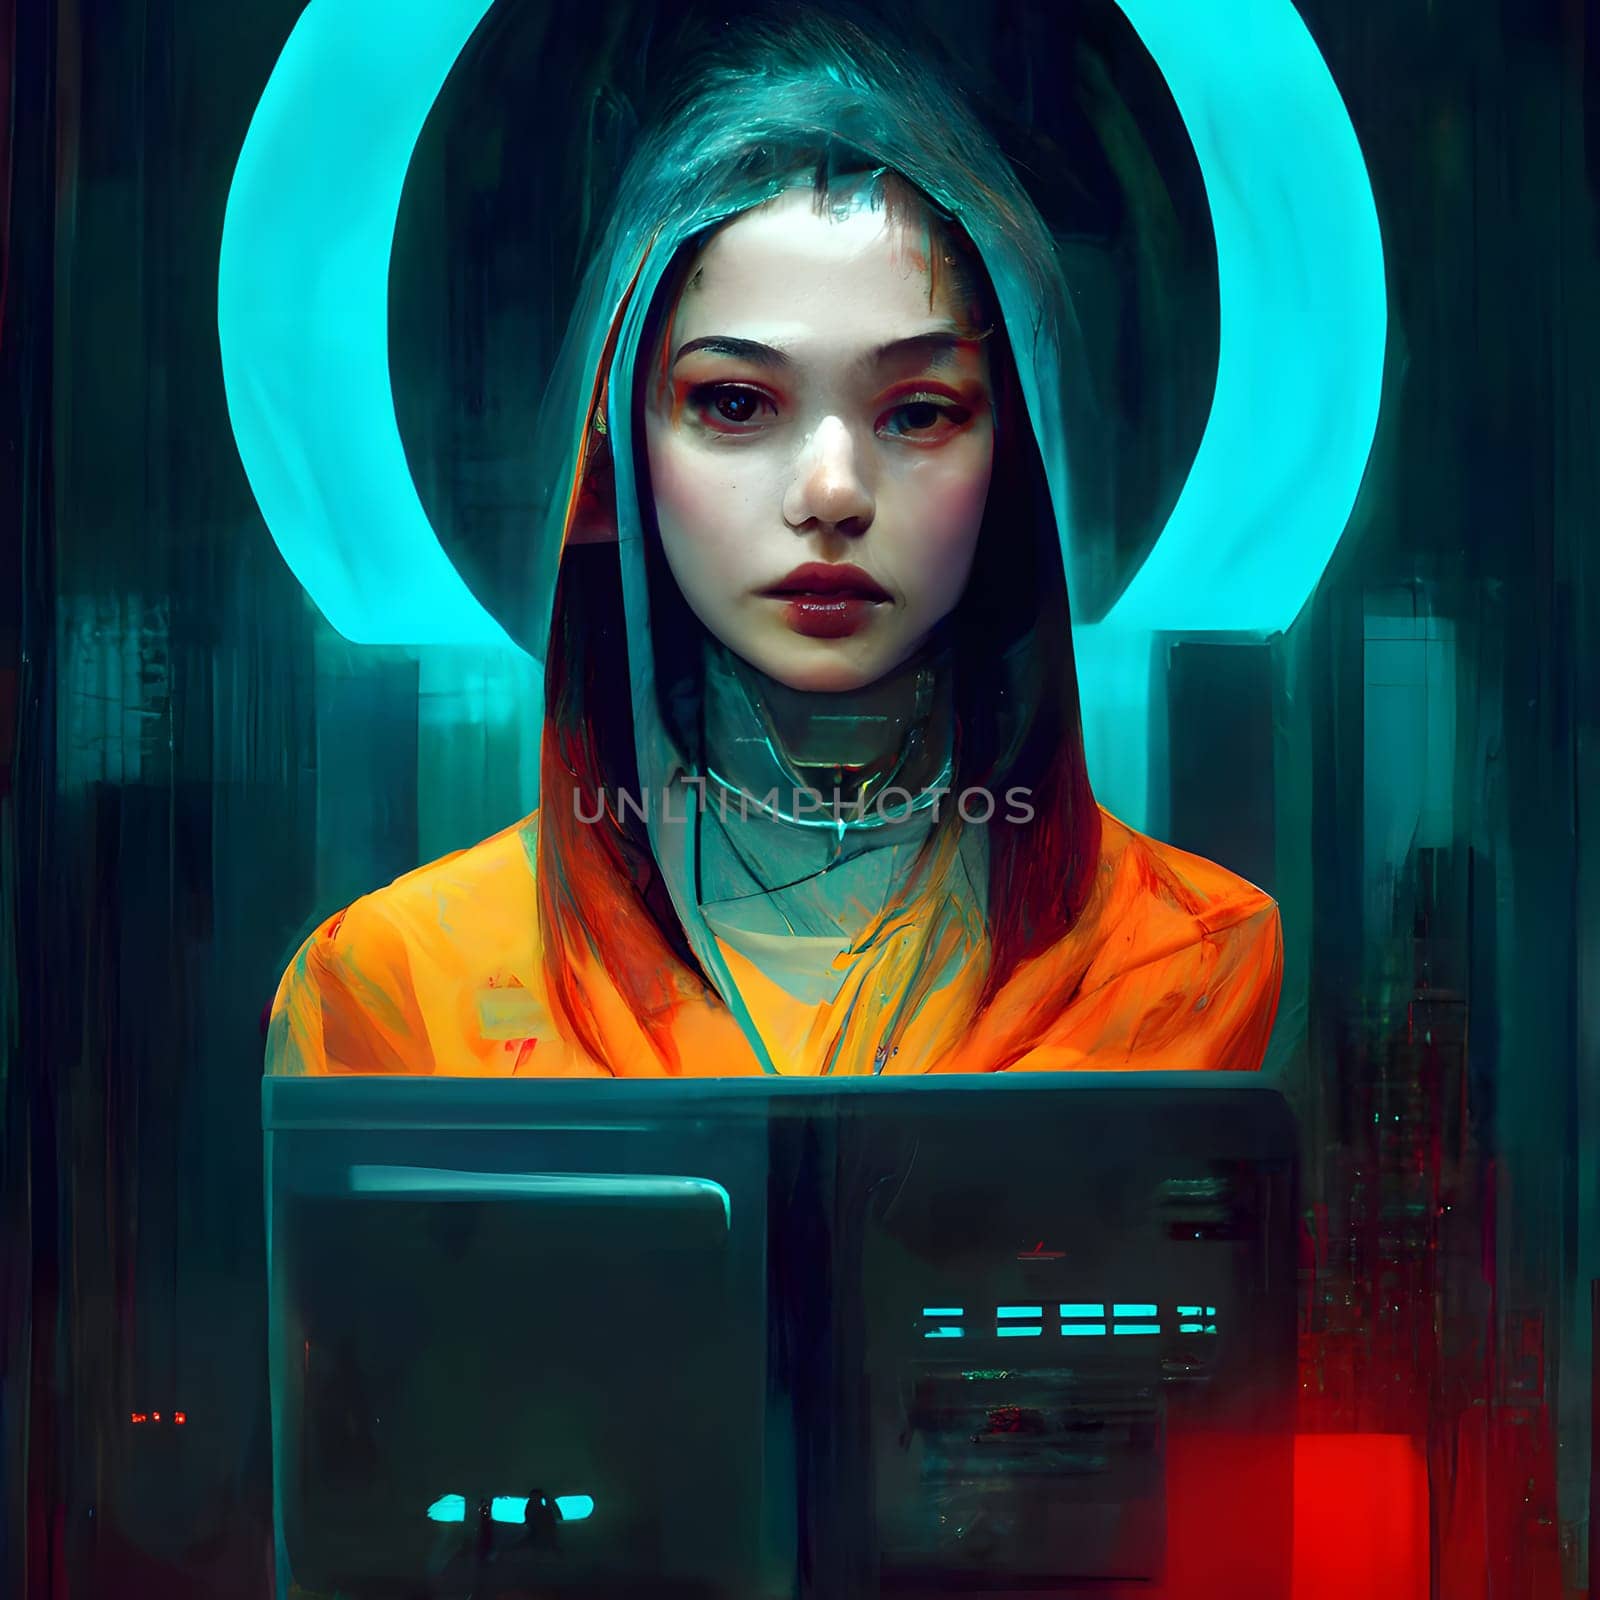 sci-fi cyber renaissance woman portrait in front of device monitor, neural network generated art. Digitally generated image. Not based on any actual person, scene or pattern.